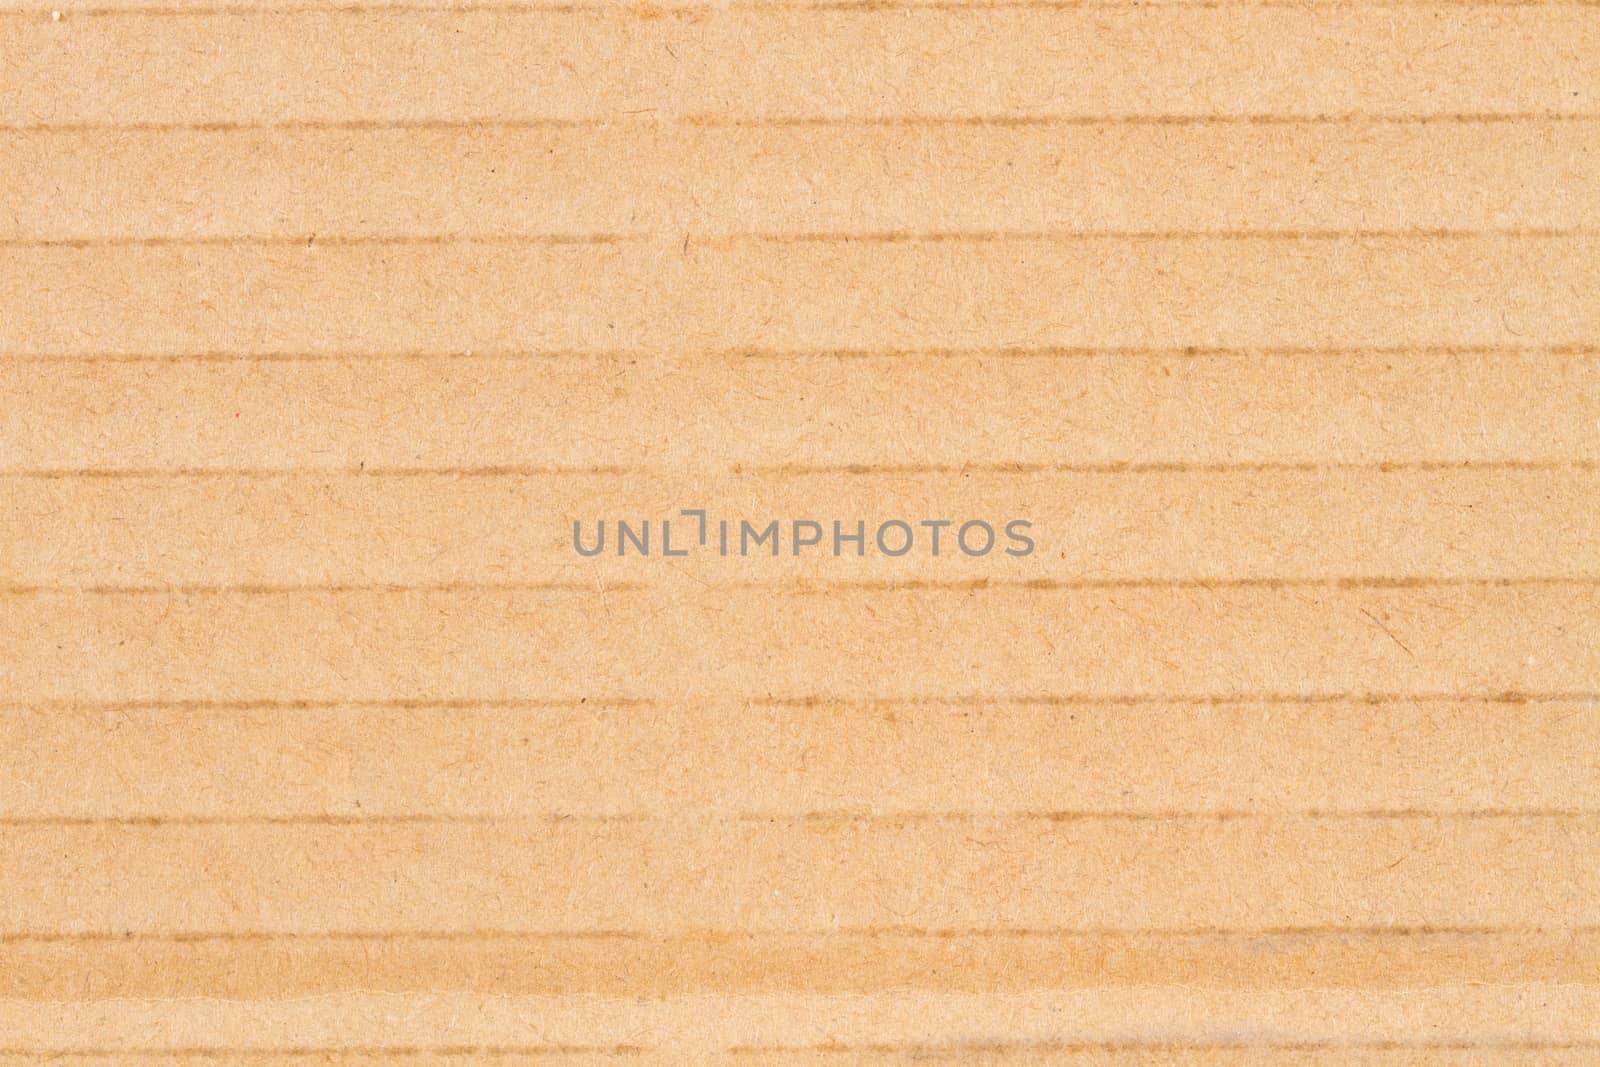 cardboard and carton textures for backgrounds by a3701027